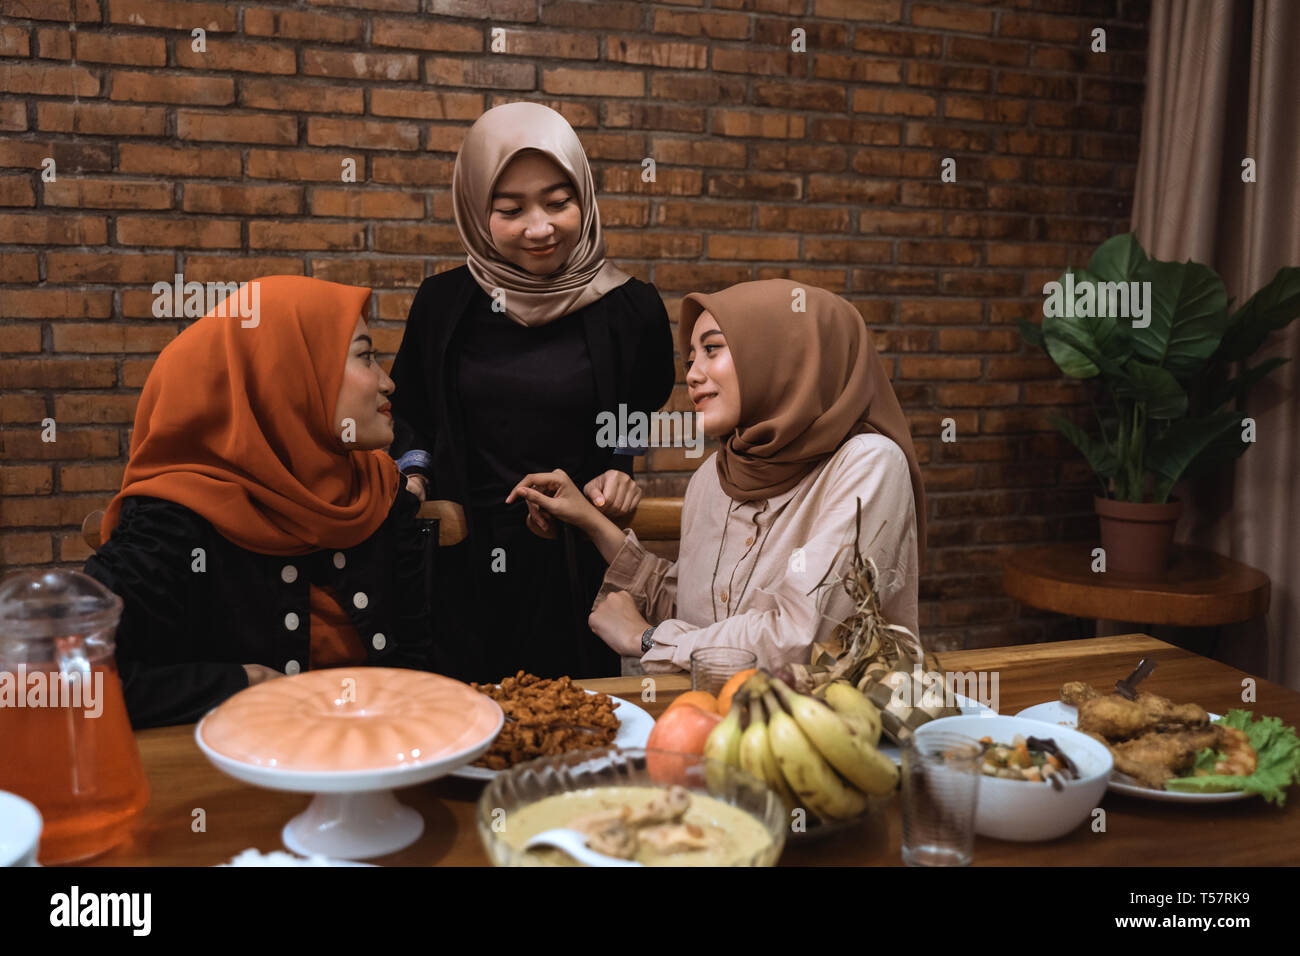 muslim woman talk to each other while dinner Stock Photo